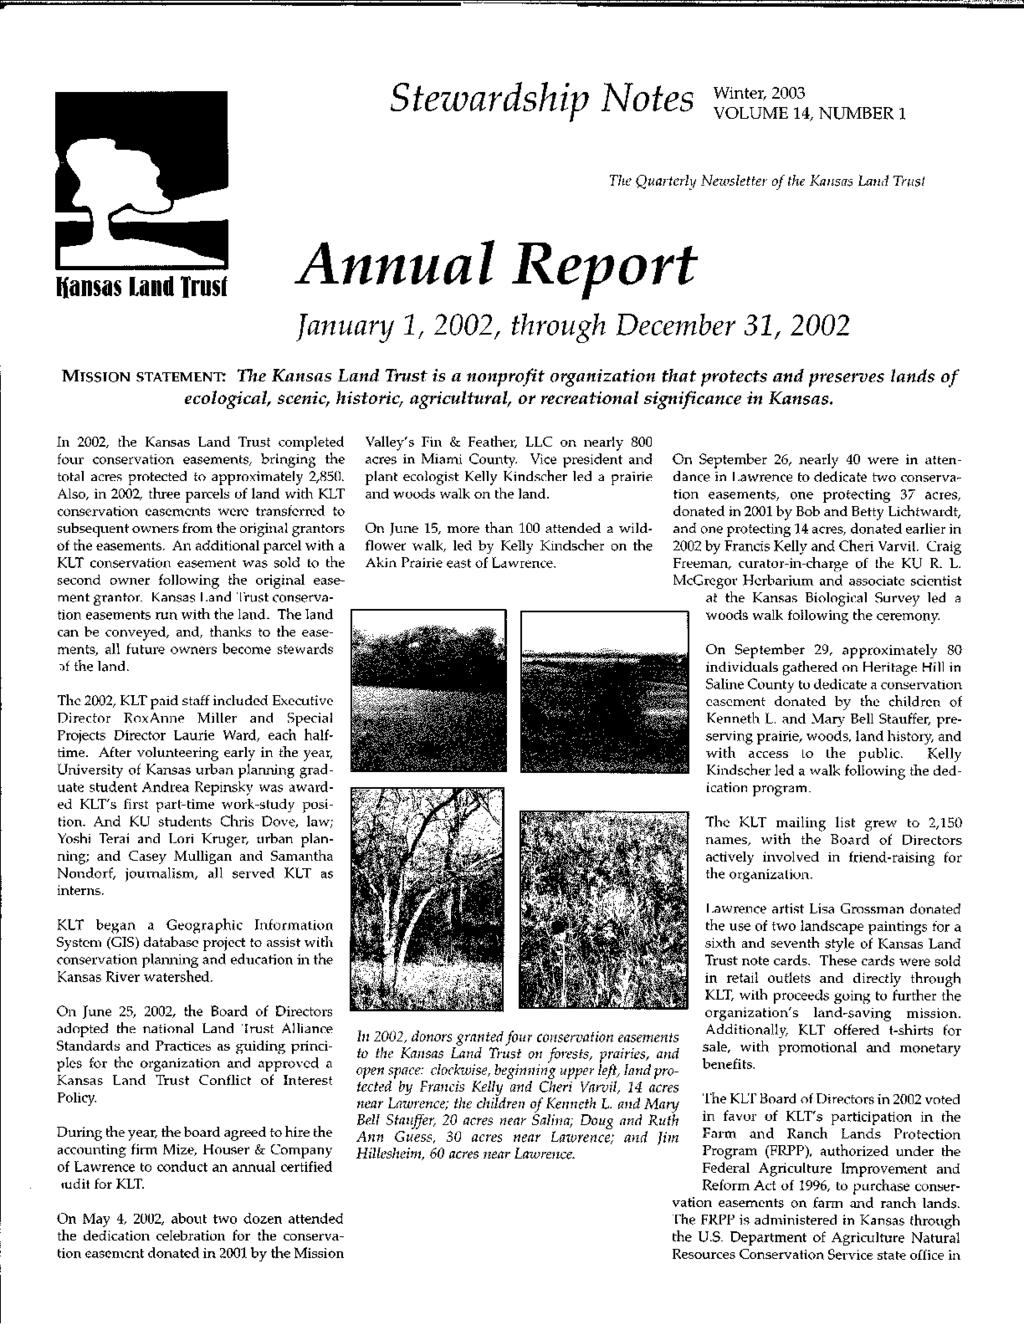 Steuuardship }Votes Winter, 2003 VOLUME 14, NUMBER 1 The Quarterly Newsletter of the Kansas Land Trust Hansas land Trus' Annual Report January 1, 2002, through December 31, 2002 MISSION STATEMENT: